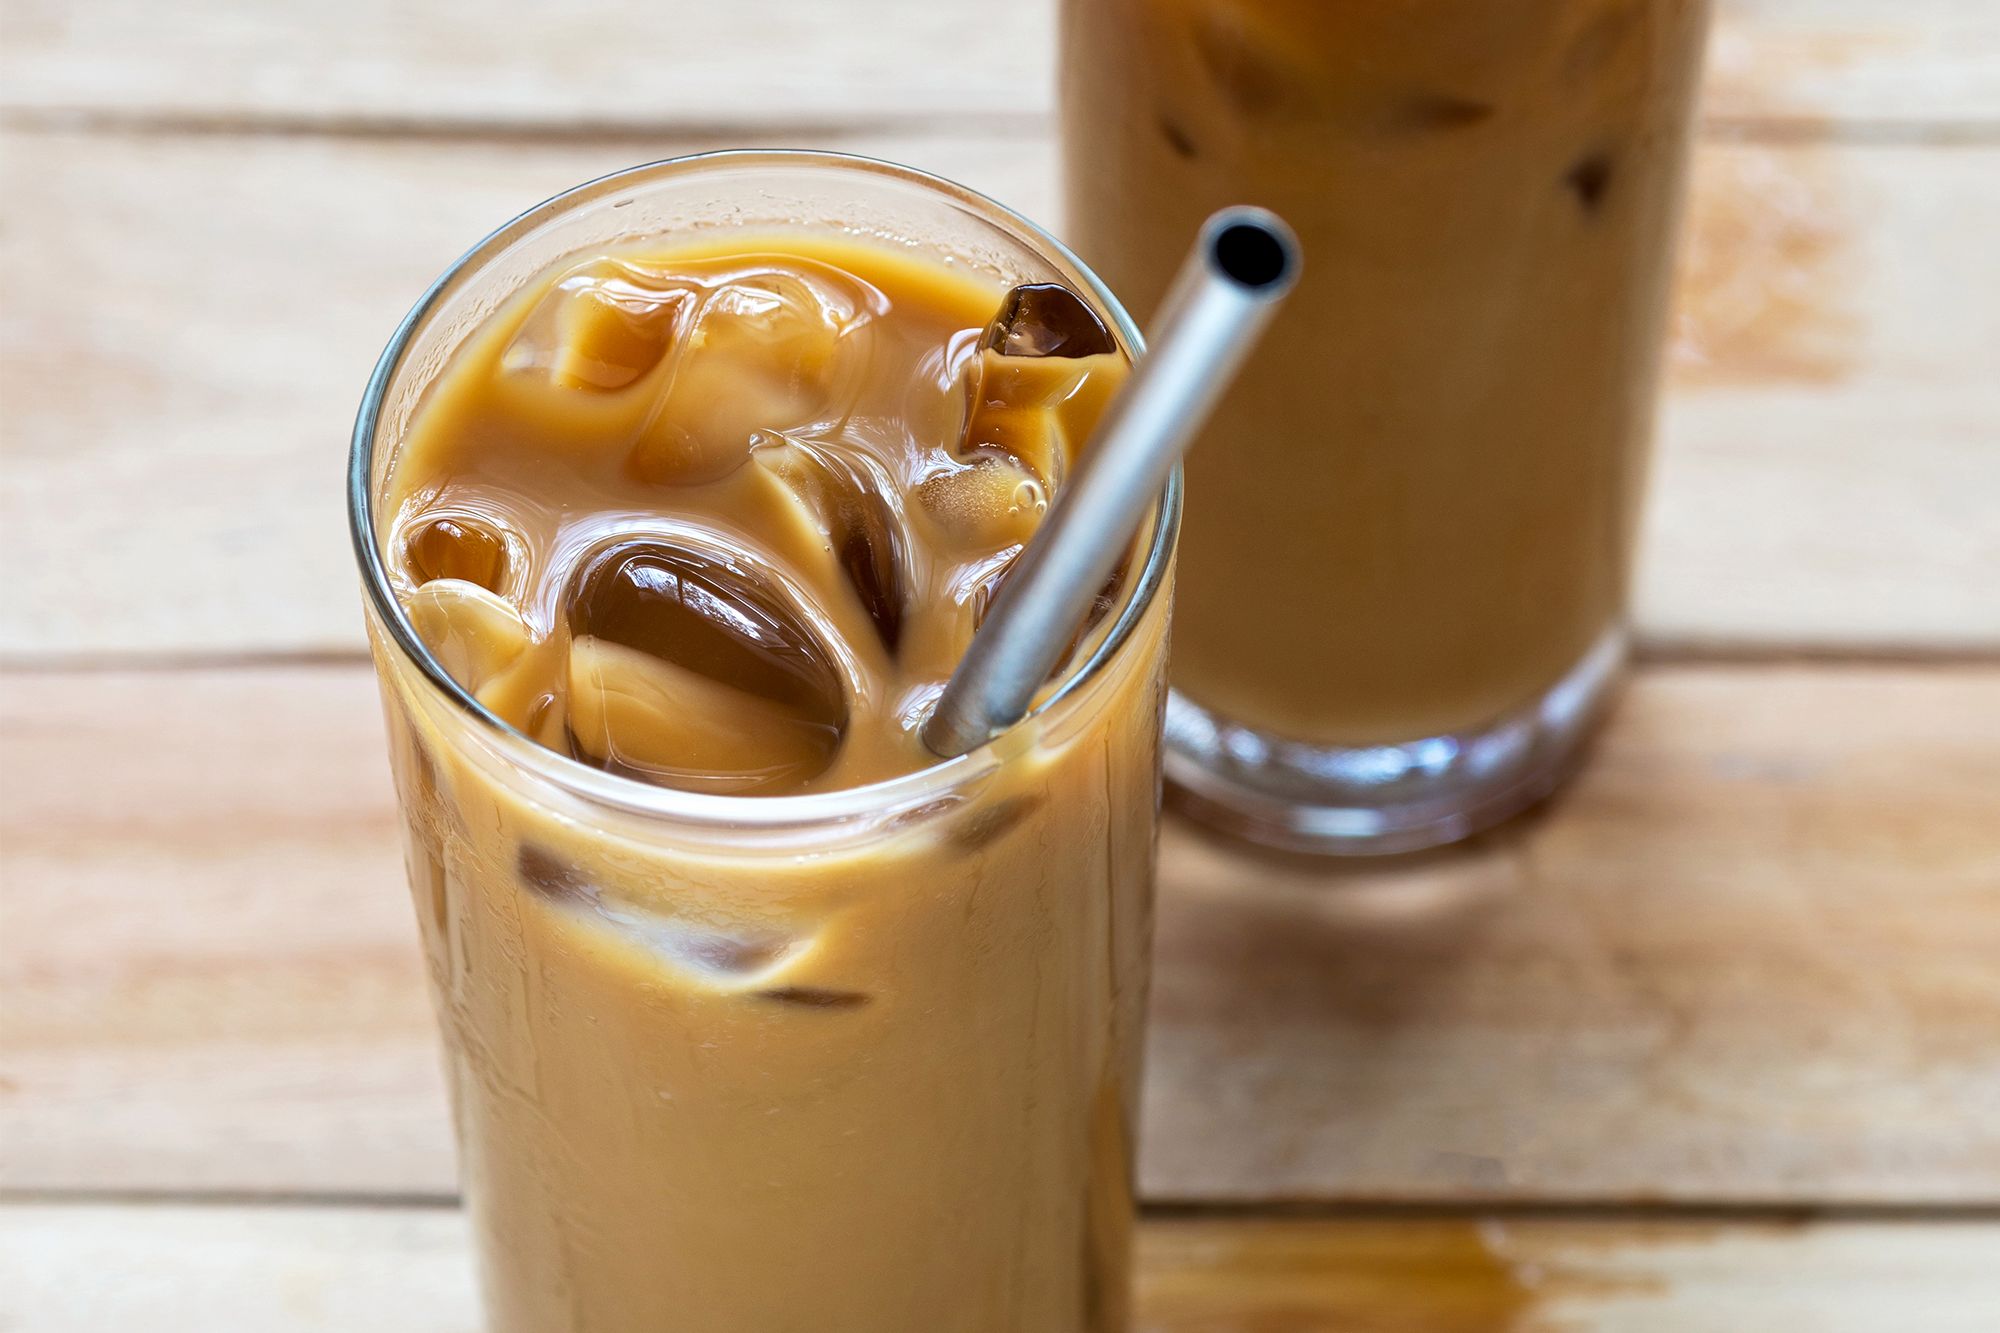 How to Make Iced Coffee at Home (5/18/2020)